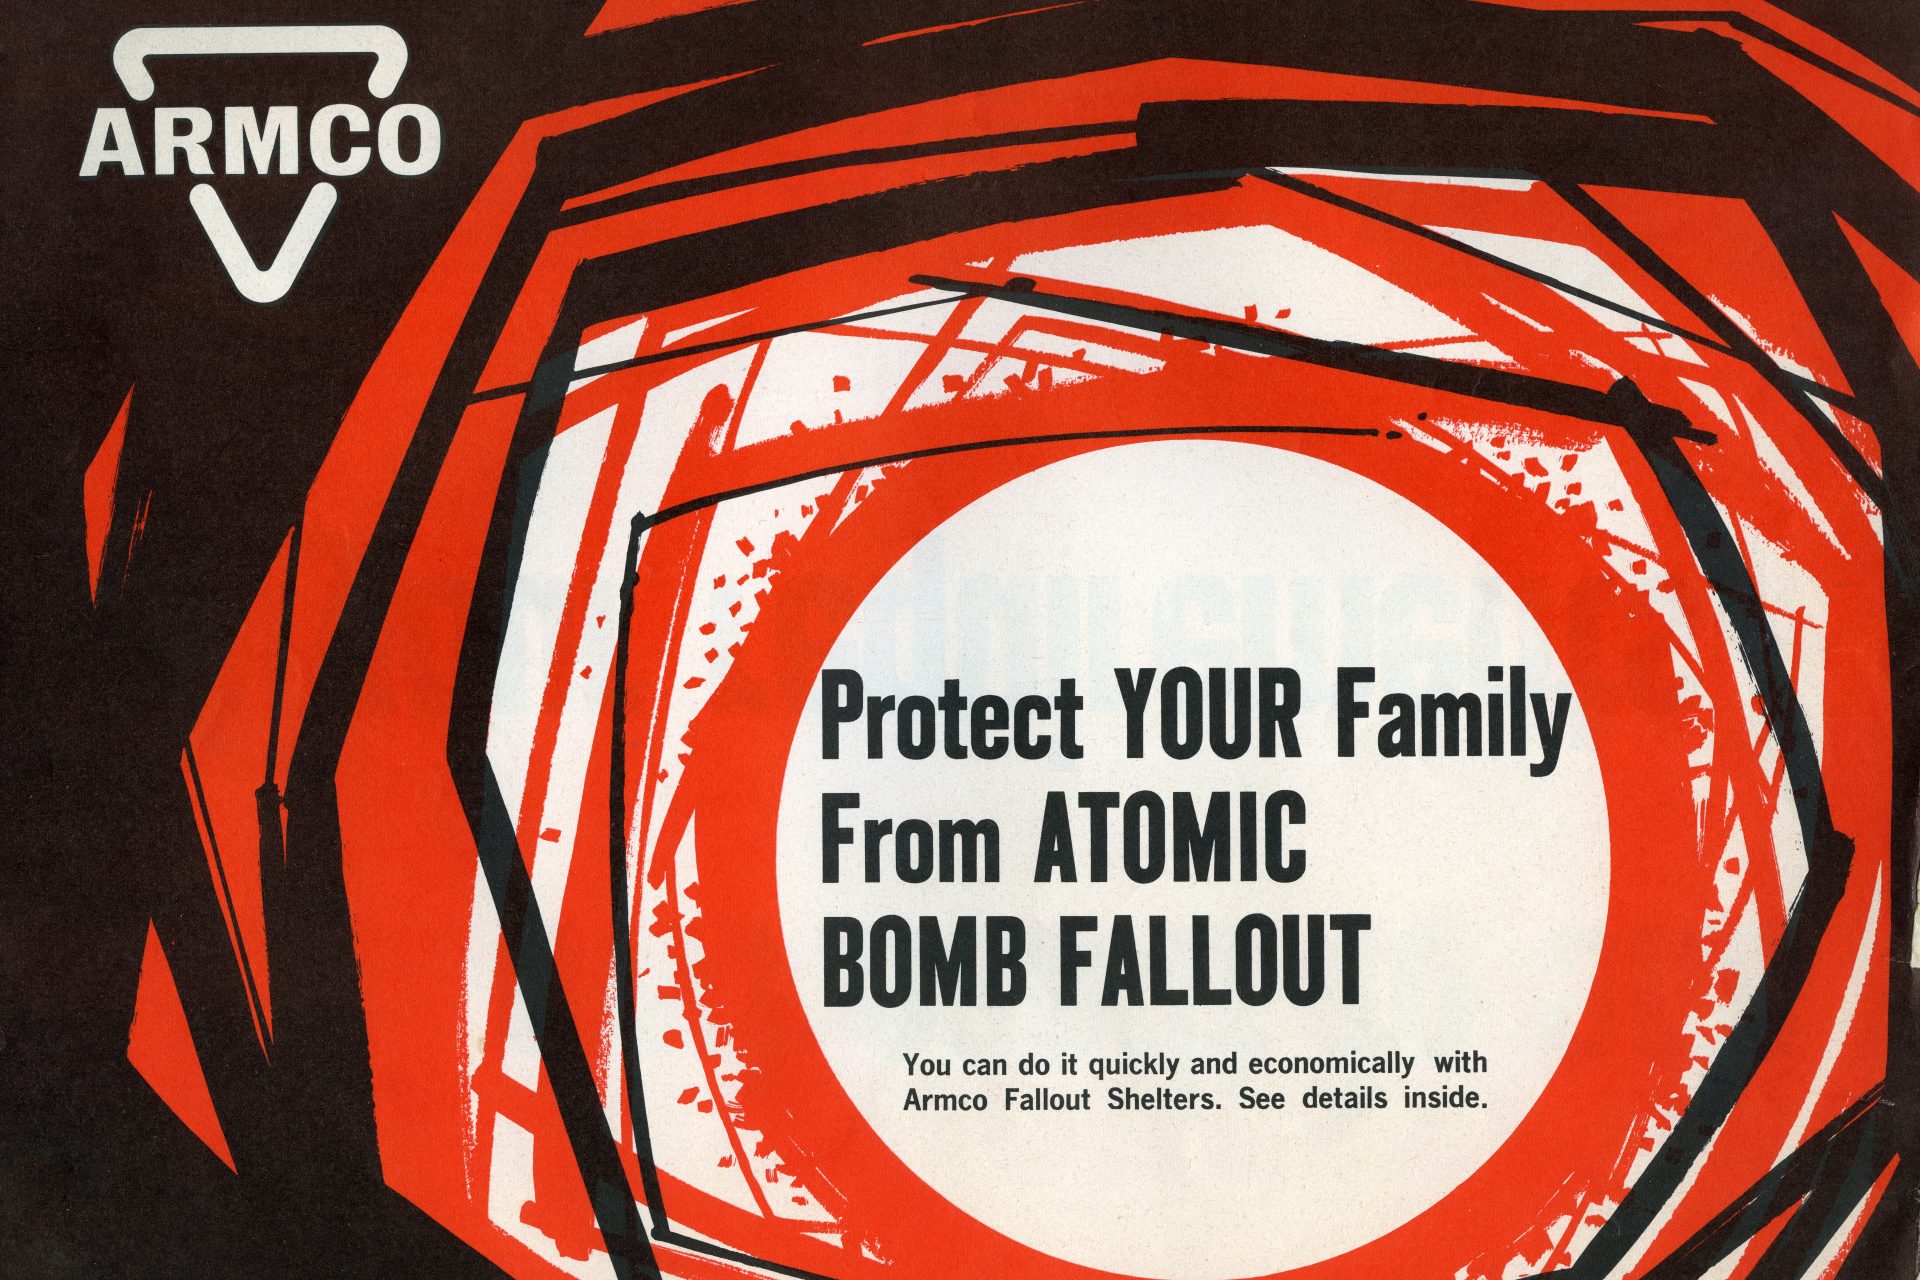 Be prepared for the worst: follow these tips from Cold War manuals